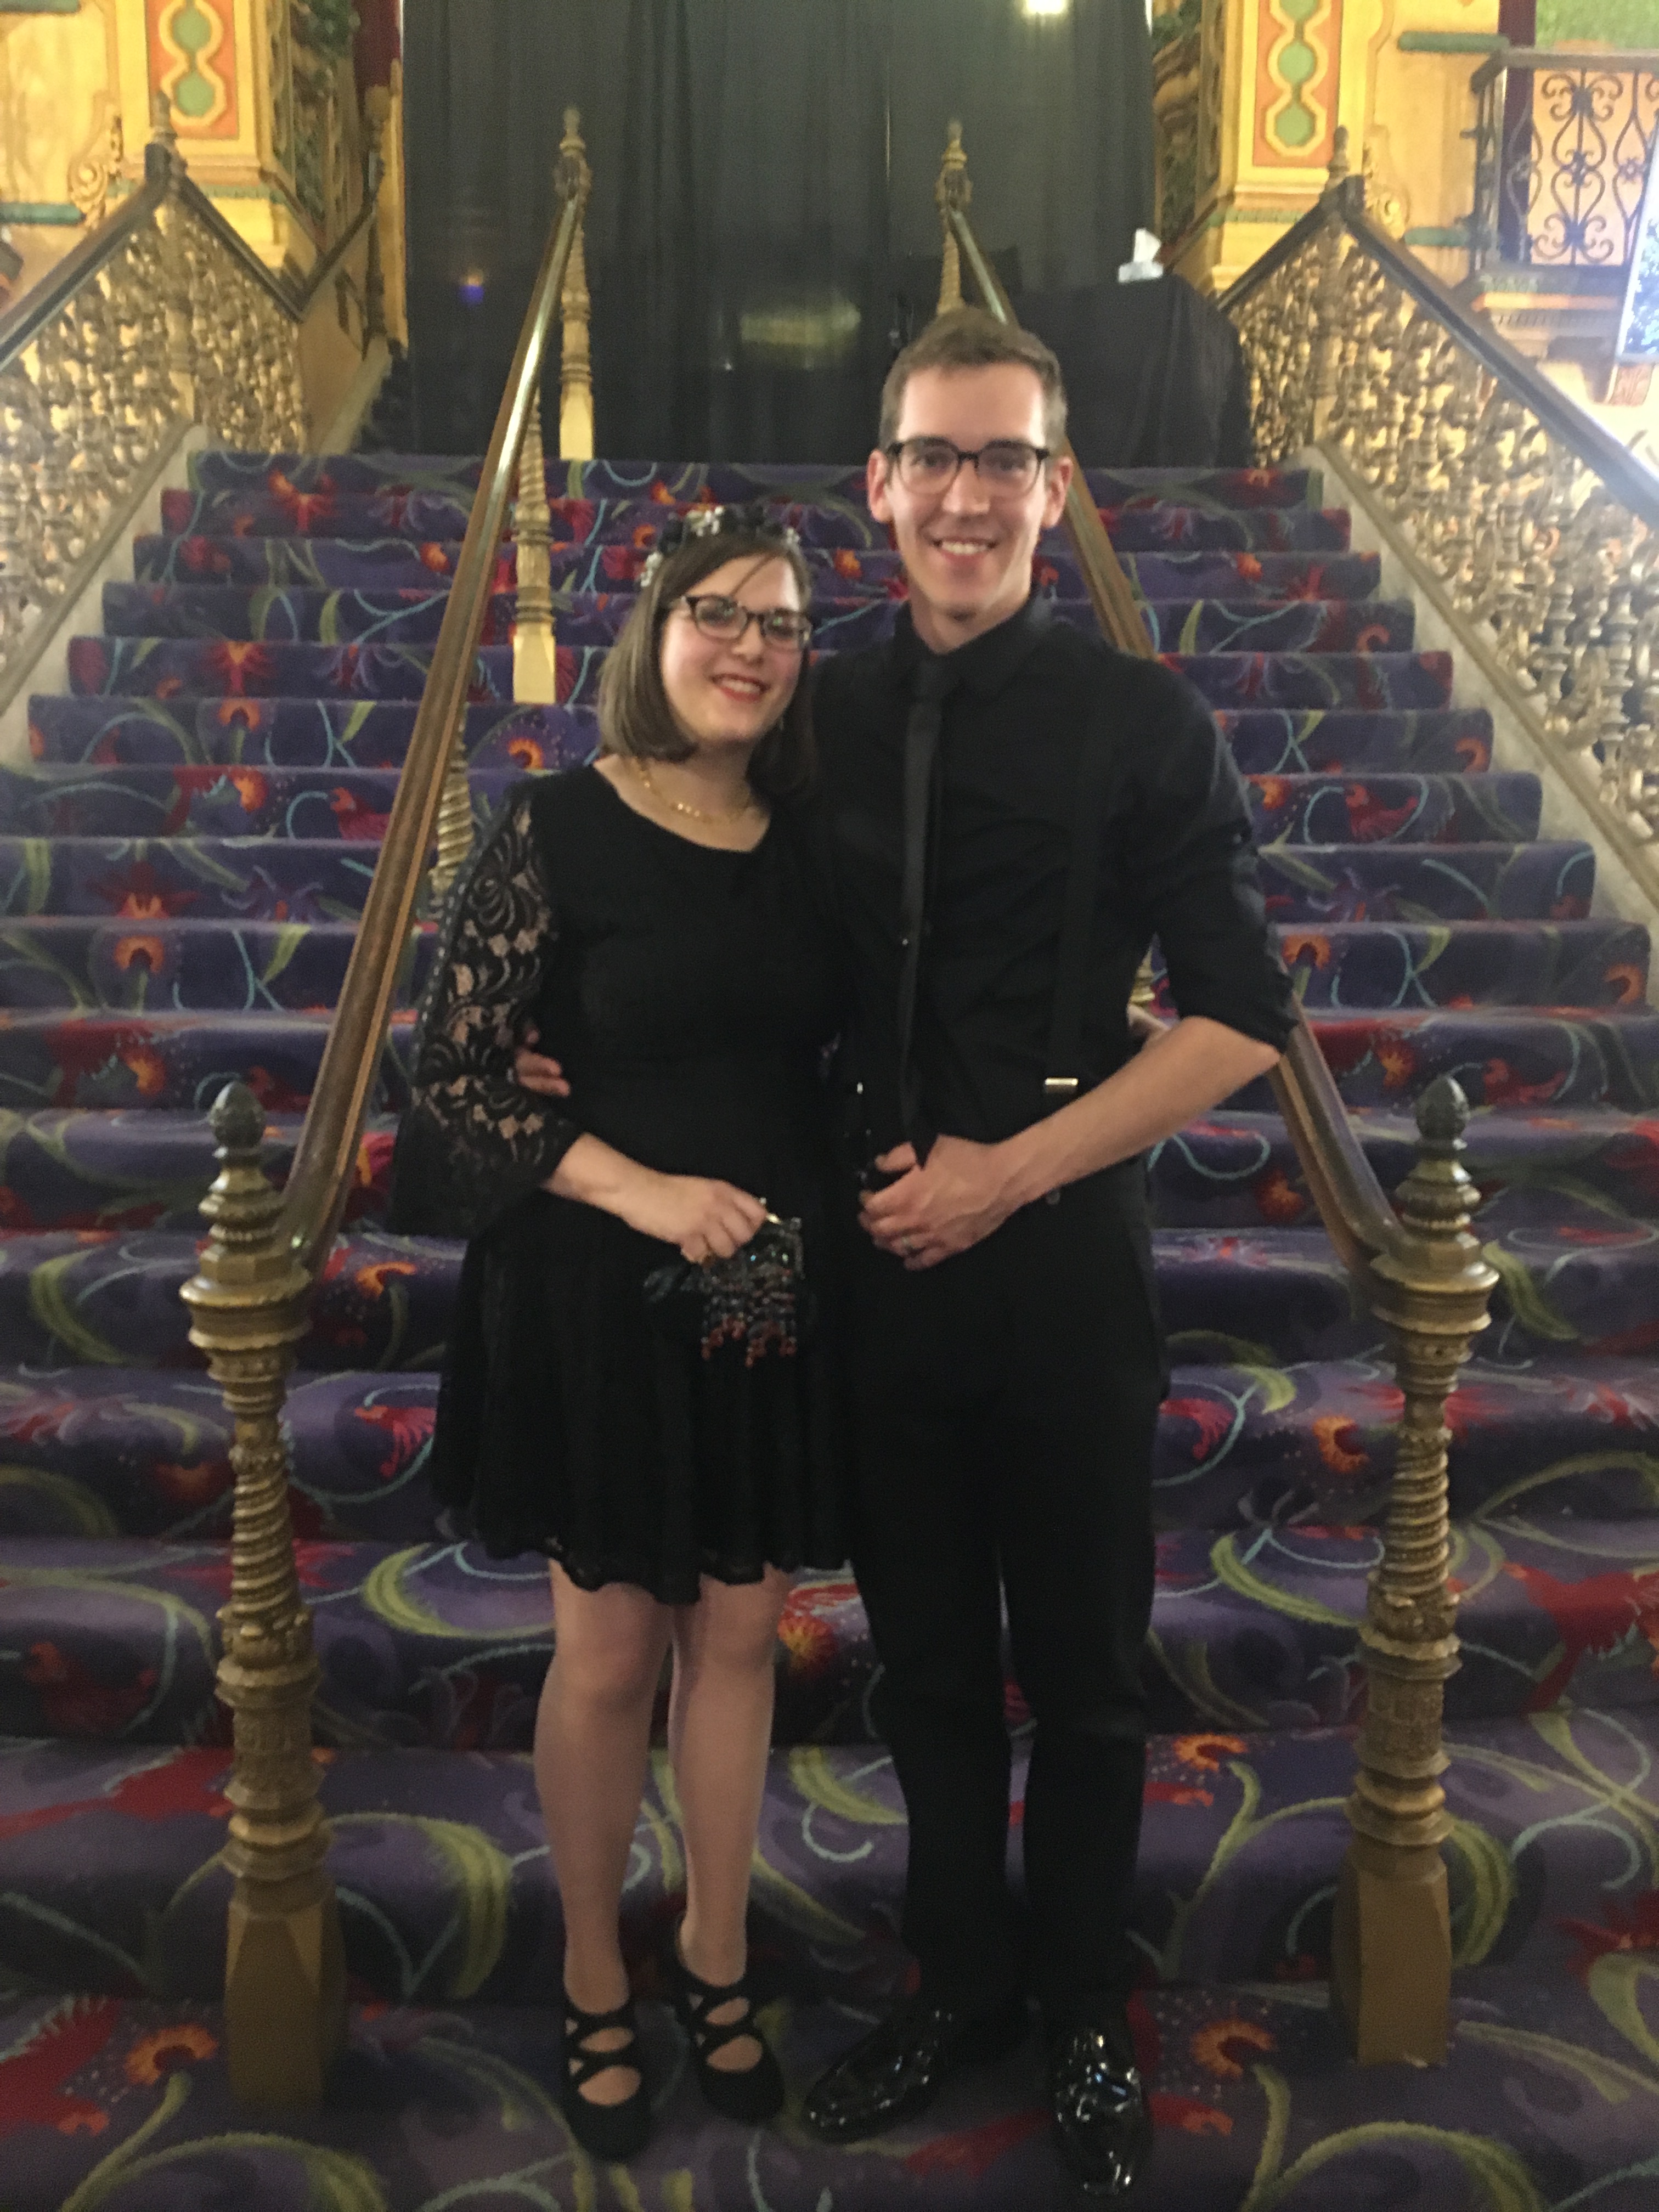 Mr. Will Ozbolt and Mrs. Katrina Ozbolt were married on Halloween in 2018 at the Akron Civic Theatre